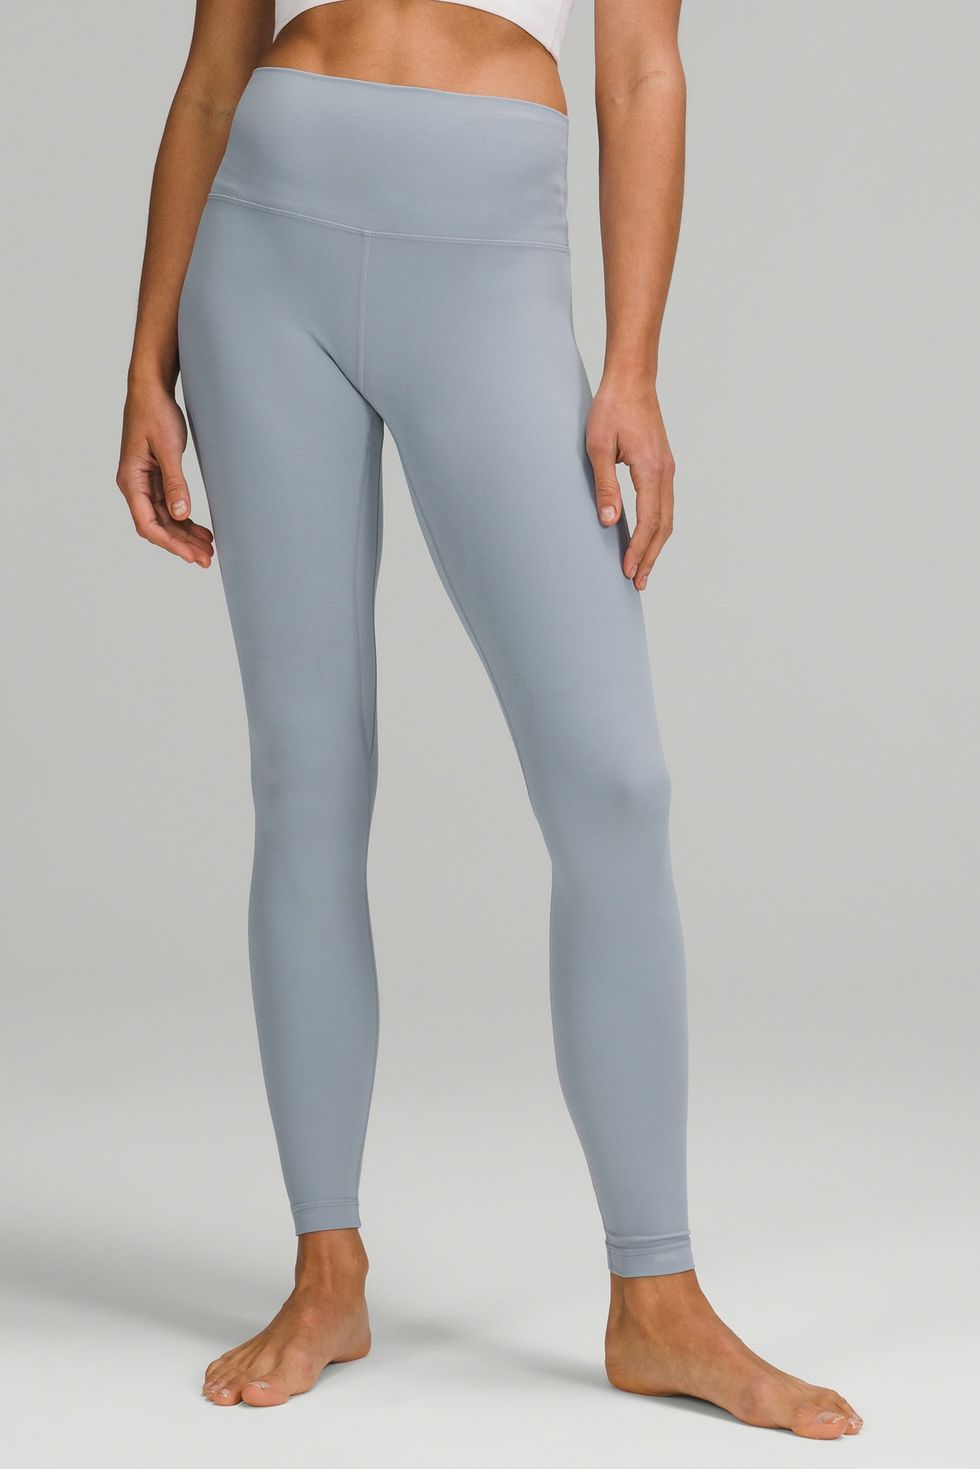 Exceptionally Stylish Lululemon Leggings at Low Prices 